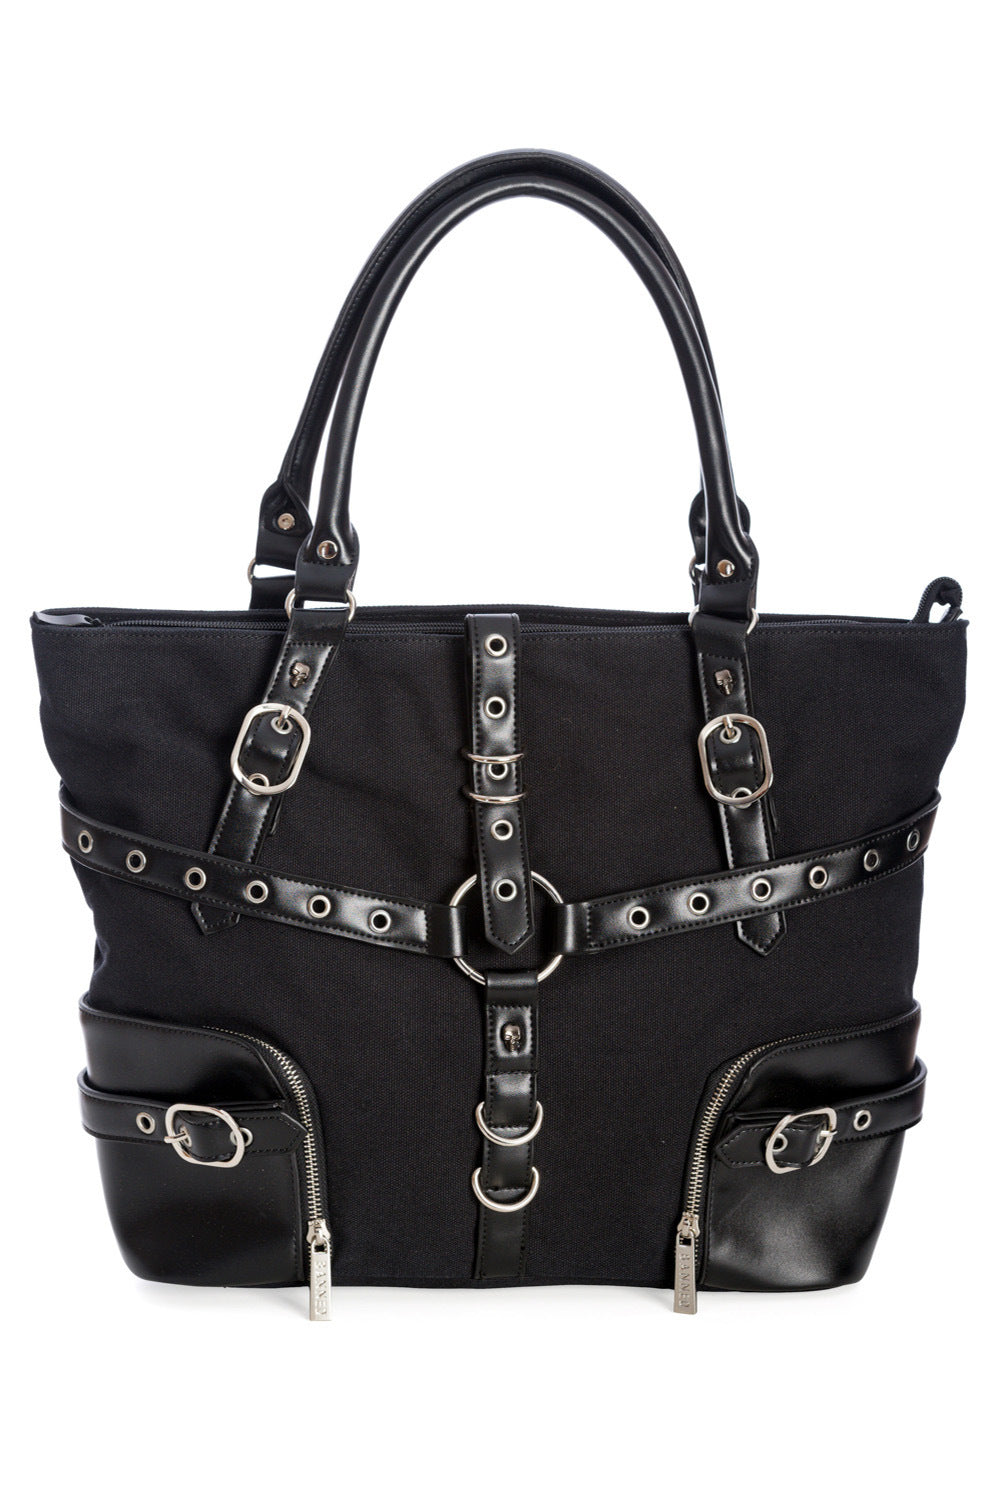 Large tote black tote bag with buckle details in the centre. 